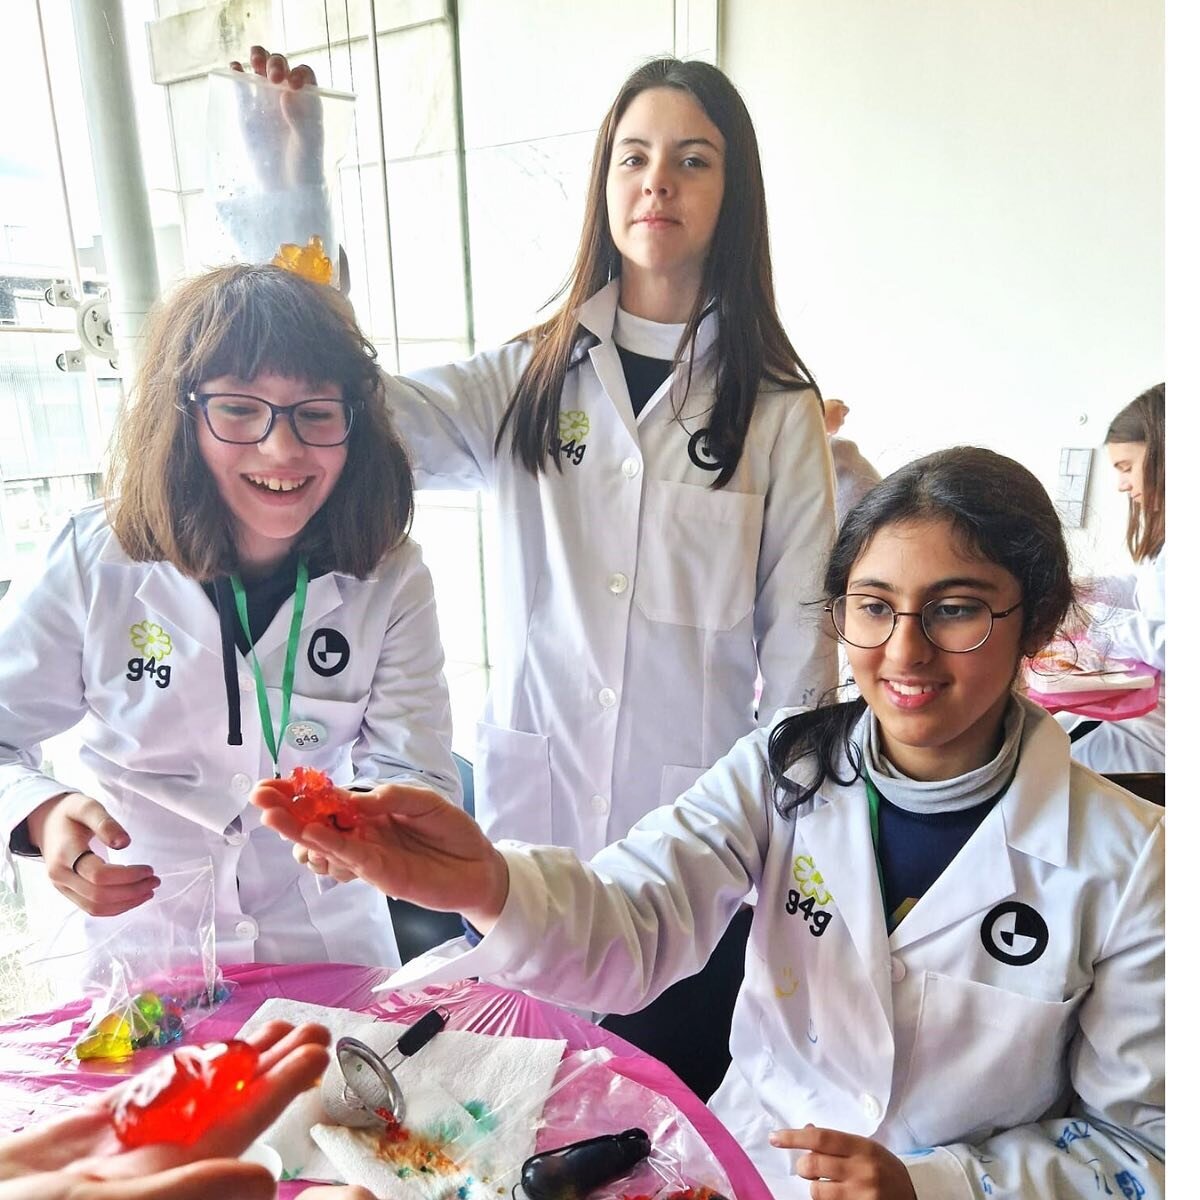 Innovate. Demonstrate. Elevate. Advance. Sustain. (I.D.E.A.S.) is the theme of this year's International Day of Women and Girls in Science, and we couldn't be more aligned!

For the past couple of days, g4g was in Paris and Lisbon to help drive innov